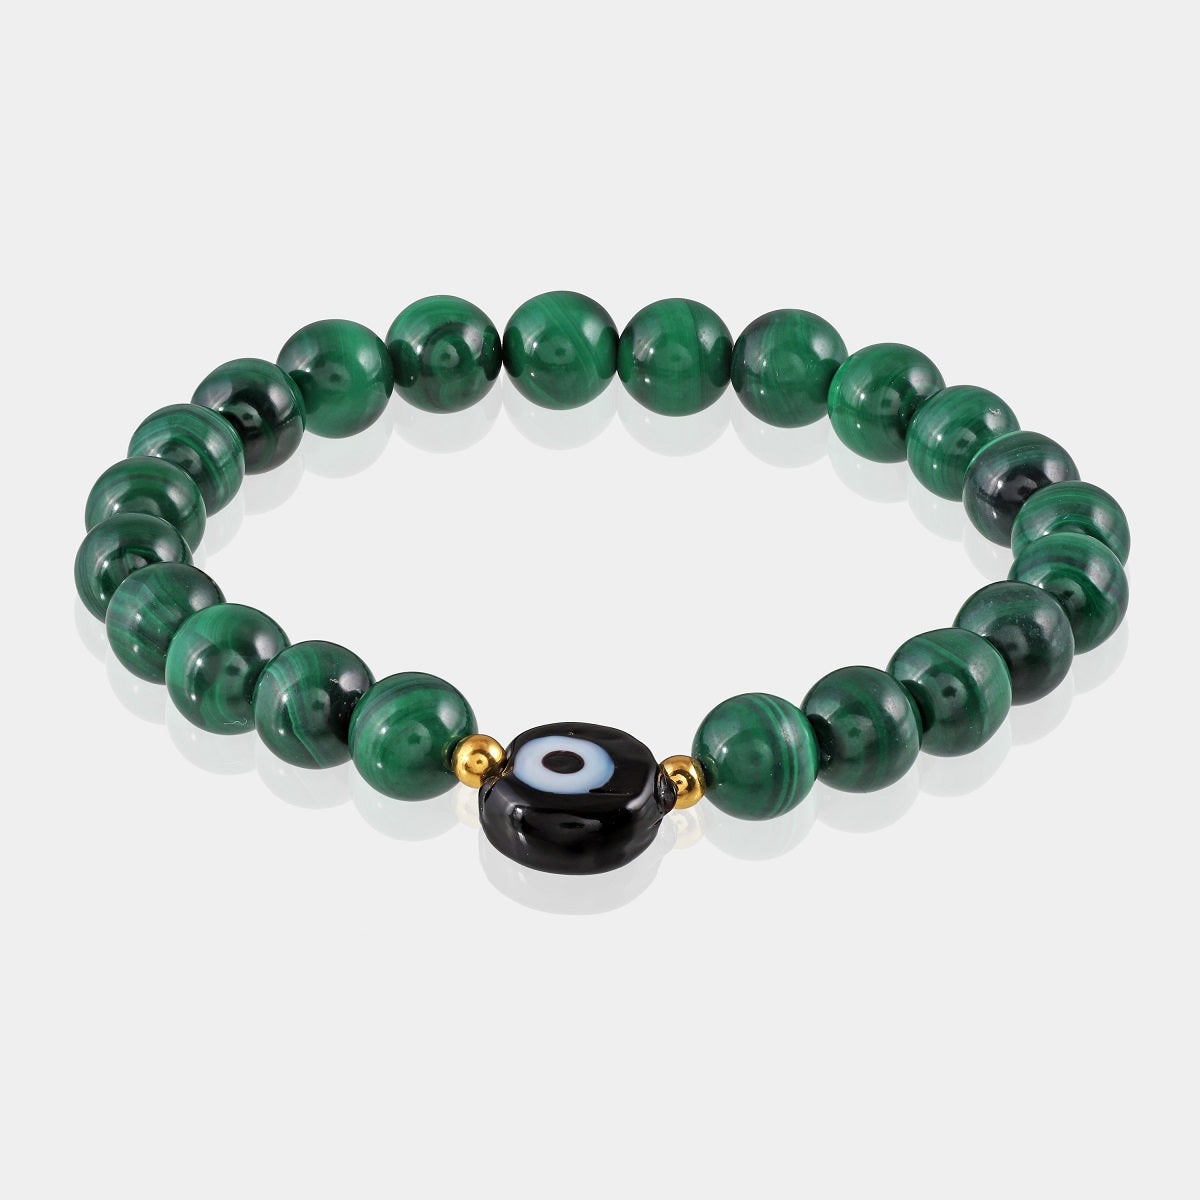 Friendship bracelet showcasing the blend of Malachite and Hematite beads on a stretchable cord.